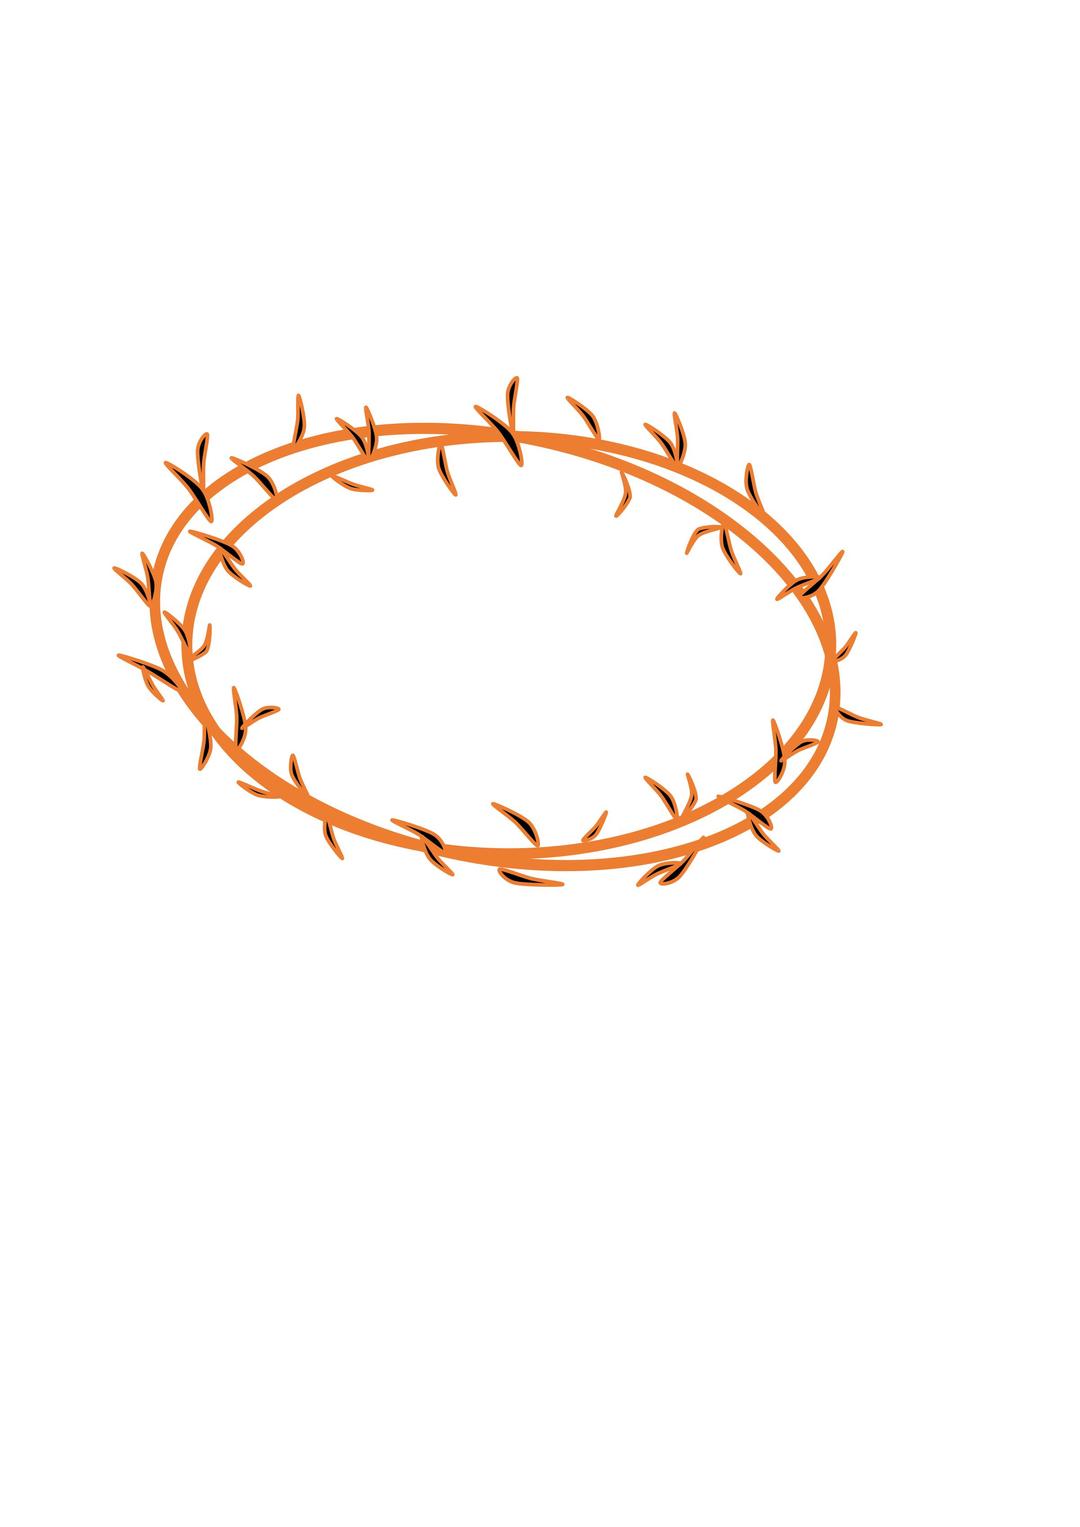 Or thorns composed png transparent